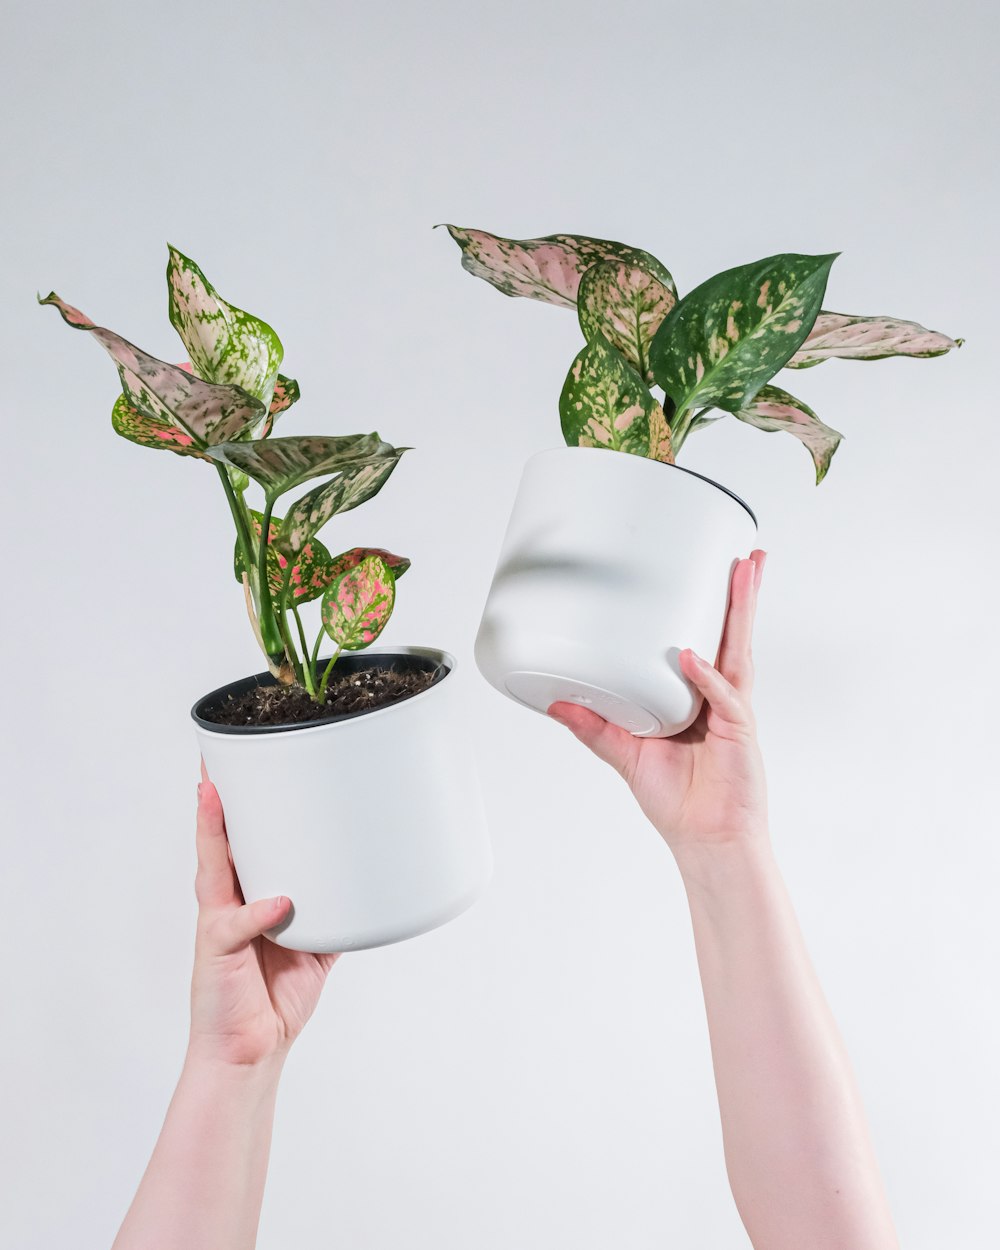 person holding white ceramic pot with green plant